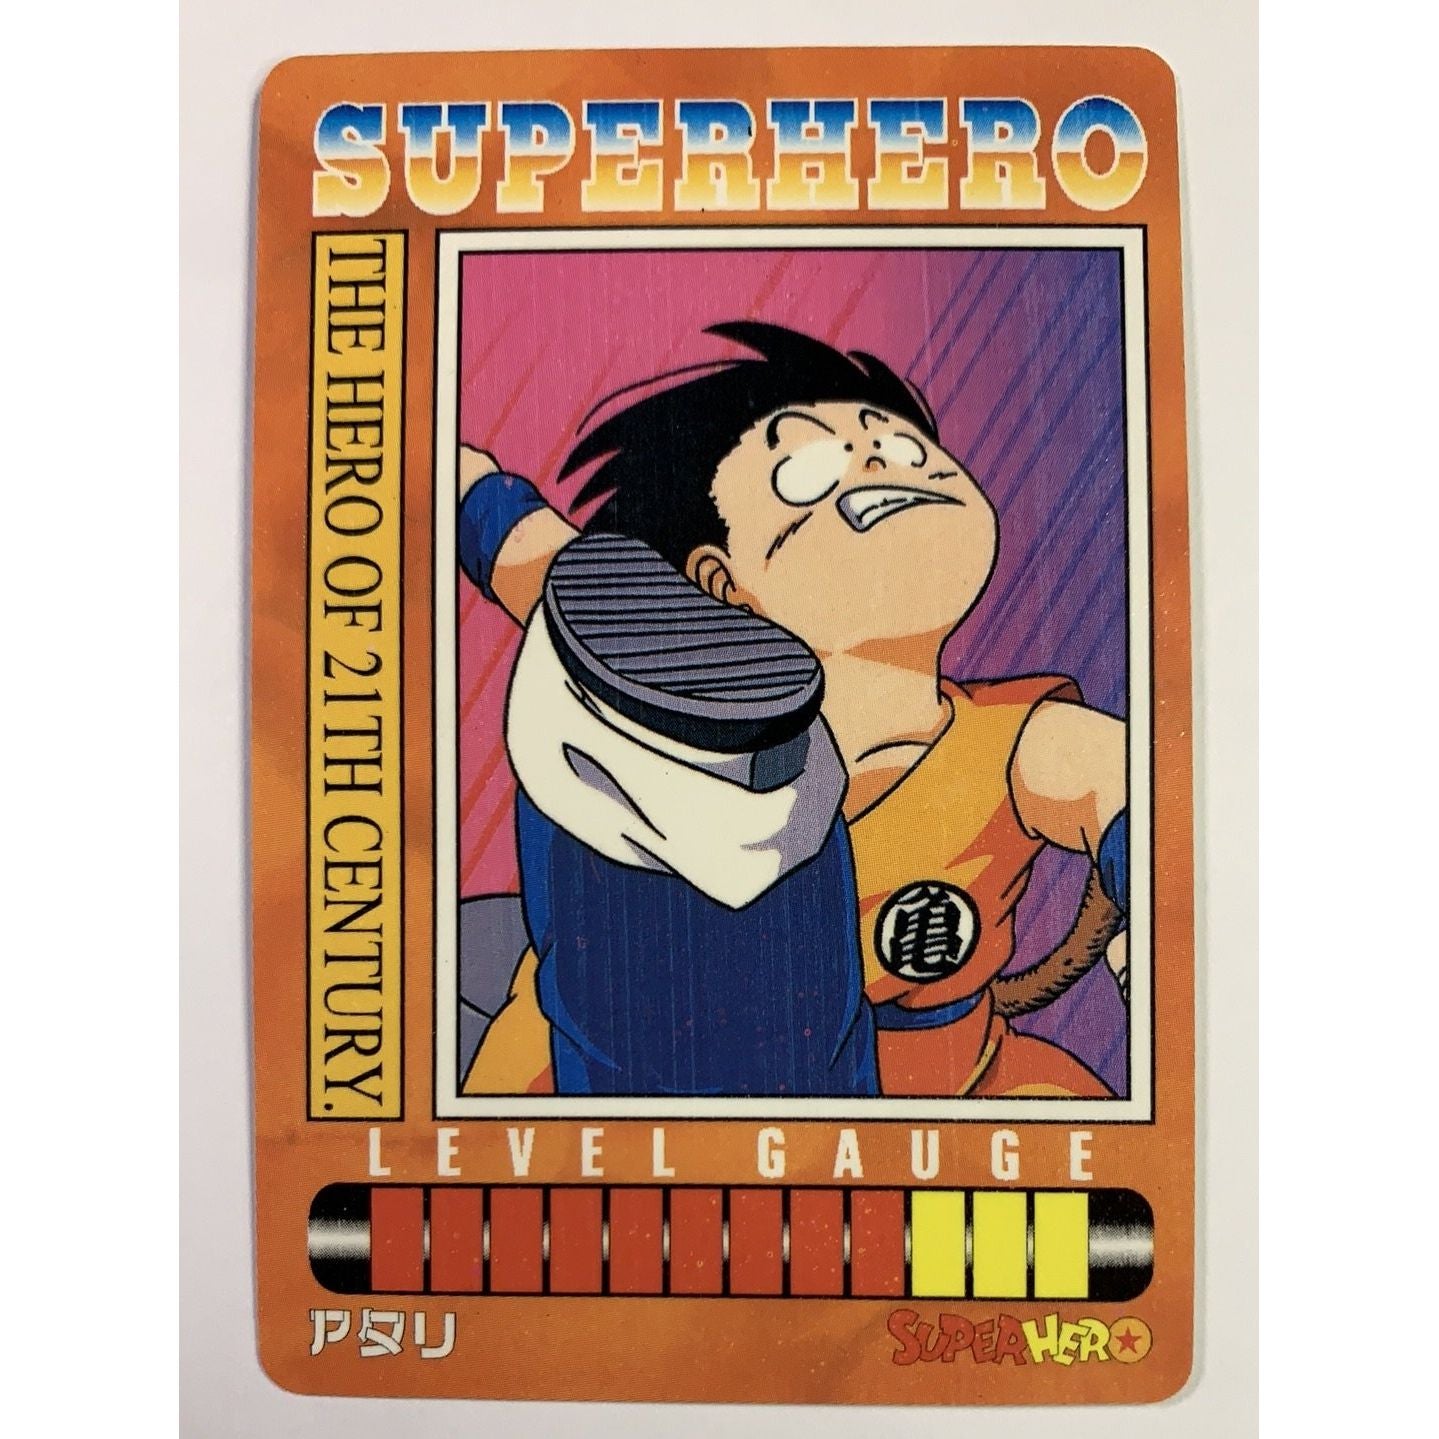  1995 Cardass Adali Super Hero Special Card S-90 Silver Foil Master Roshi V Goku (Boots to the Face)  Local Legends Cards & Collectibles